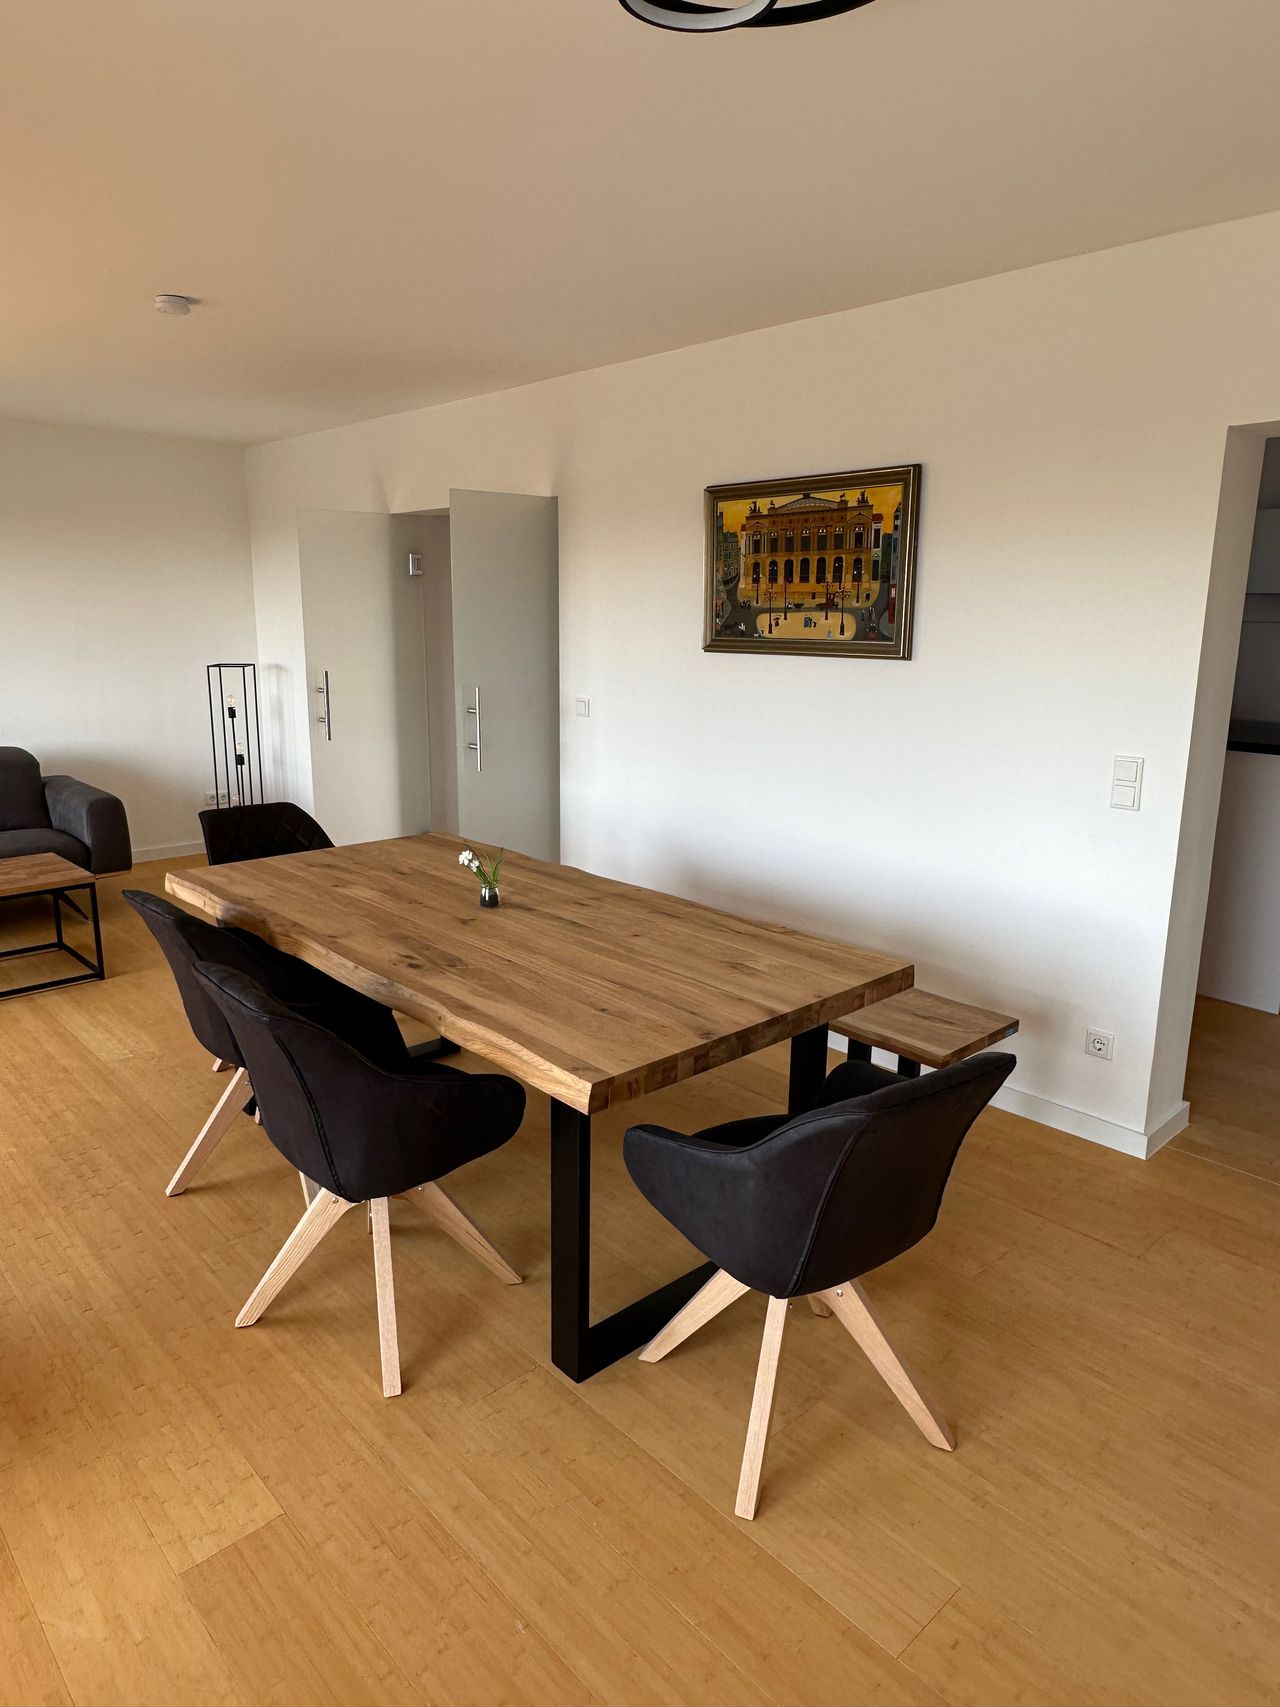 Beautiful and bright furnished 4-Room Apartment, 120 qm with Skyline and Taunus Views near the European School.